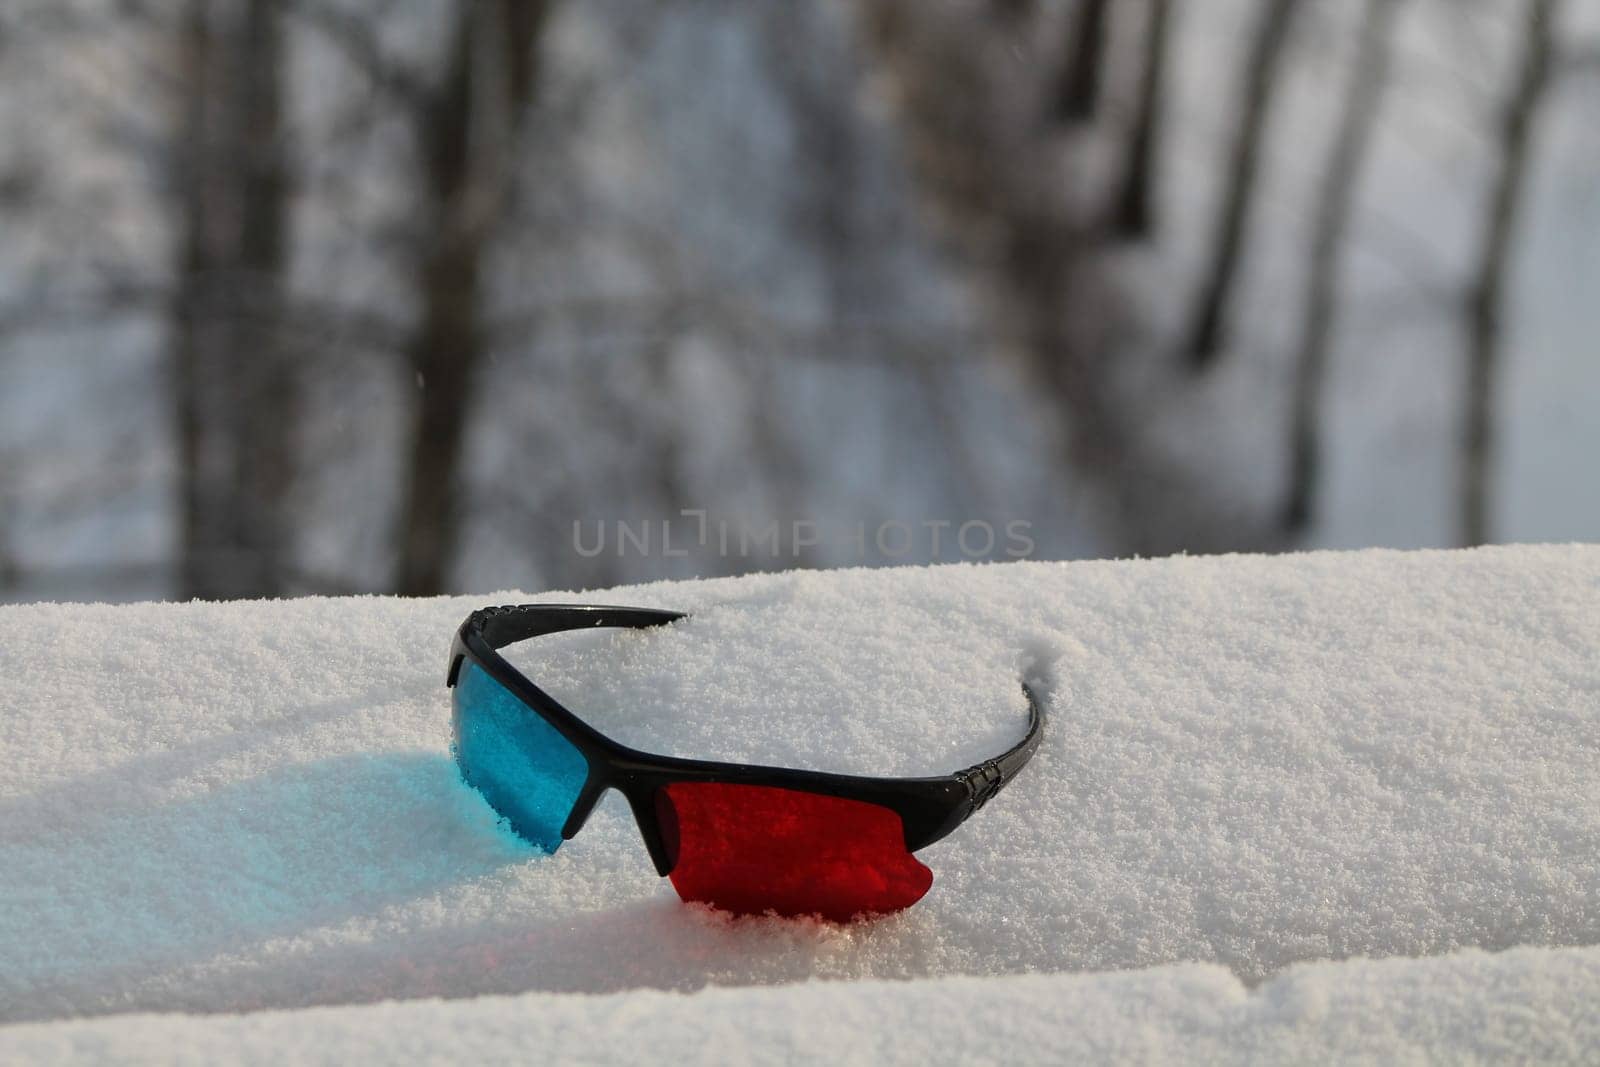 Watching movies with anaglyph 3D glasses by architectphd